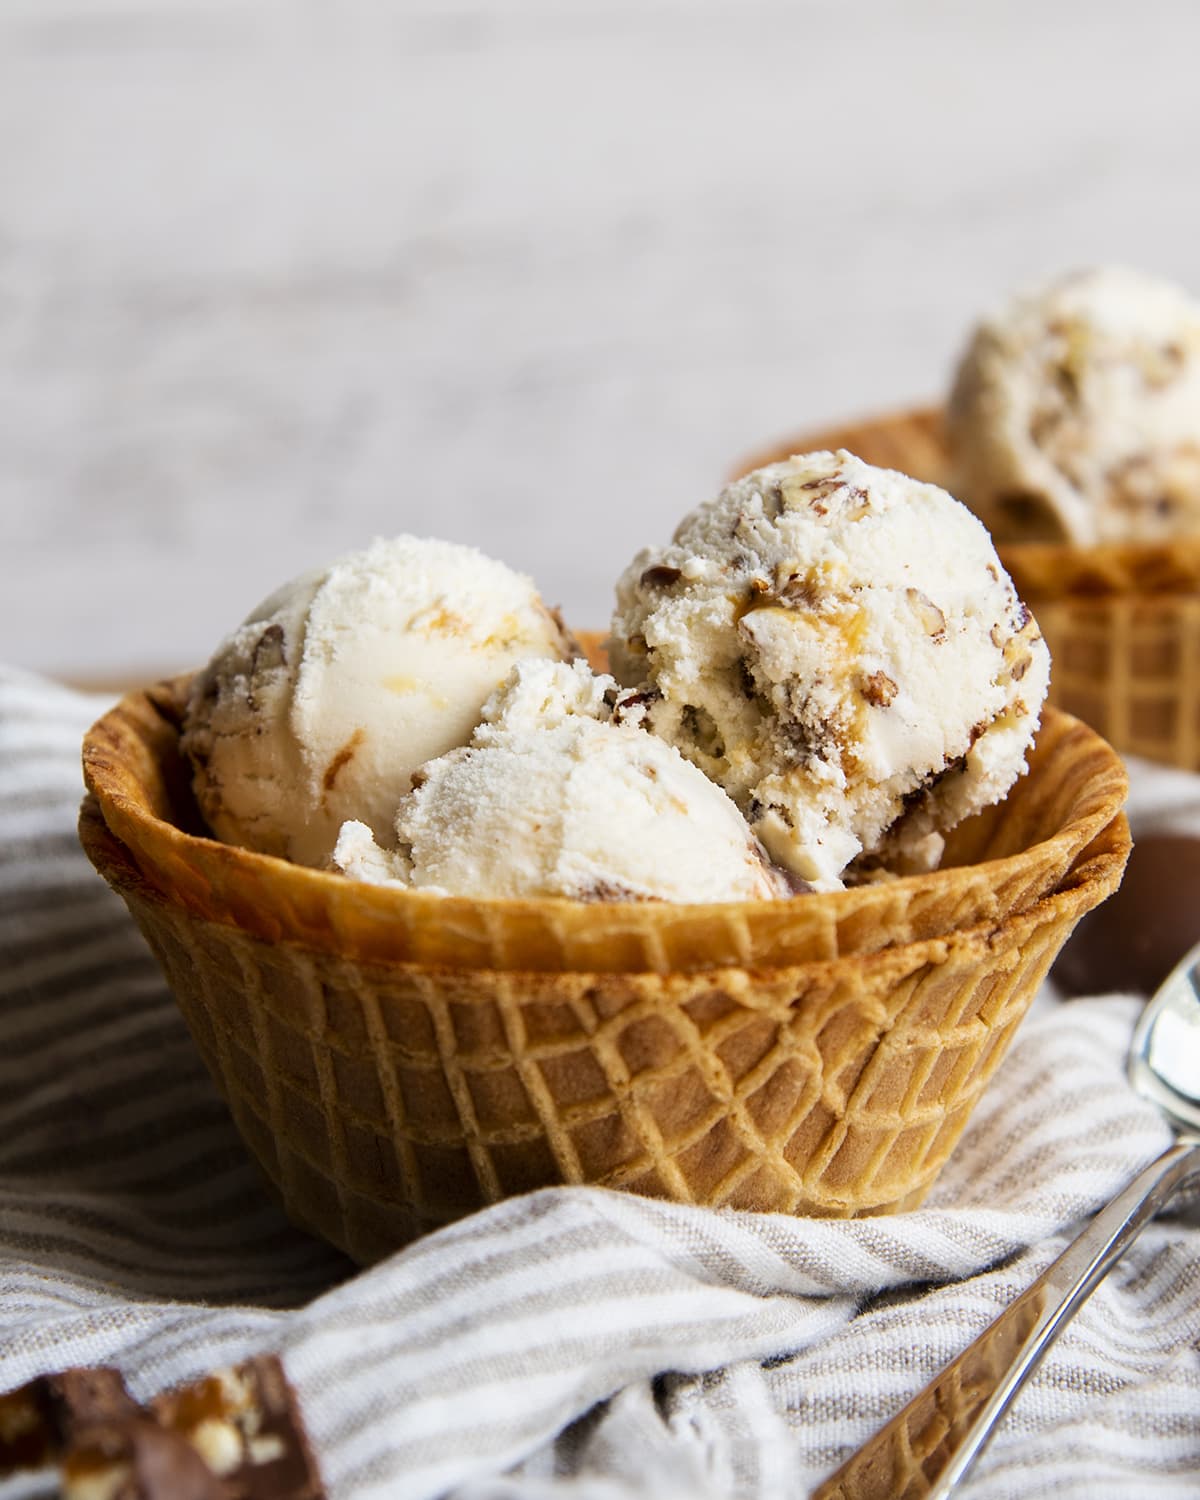 A bowl of turtle ice cream made with a waffle cone bowl.